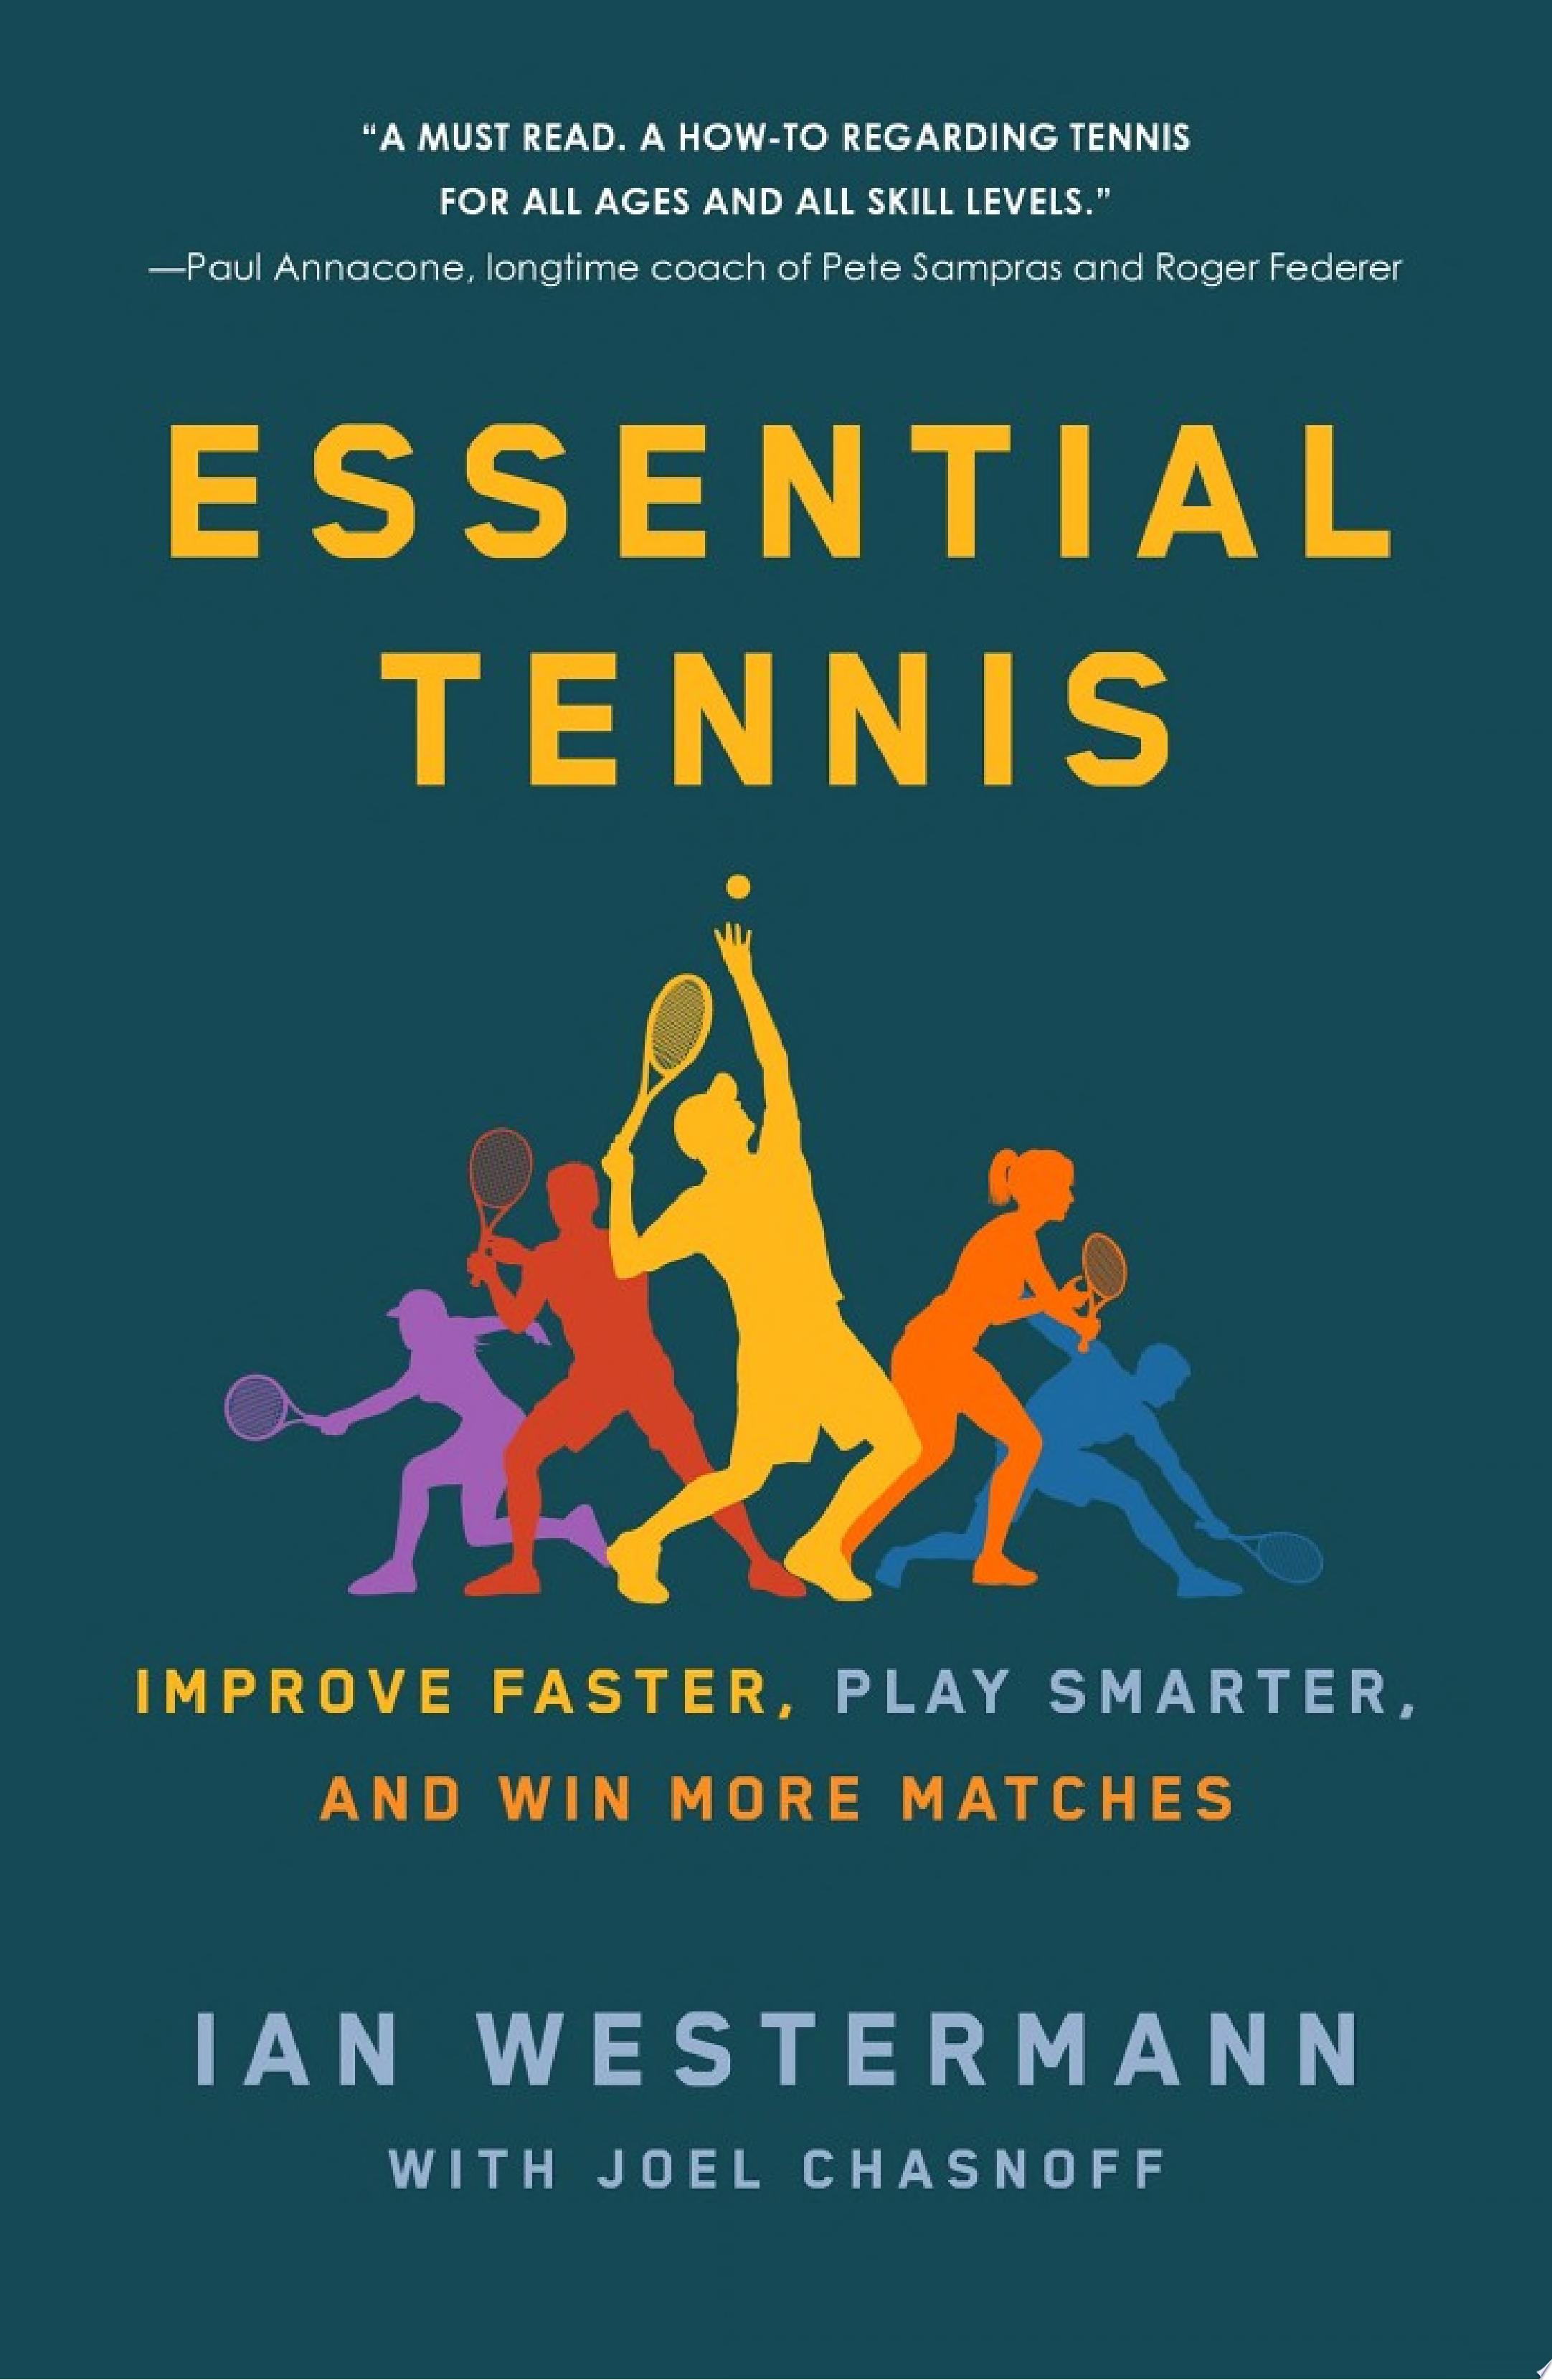 Image for "Essential Tennis"